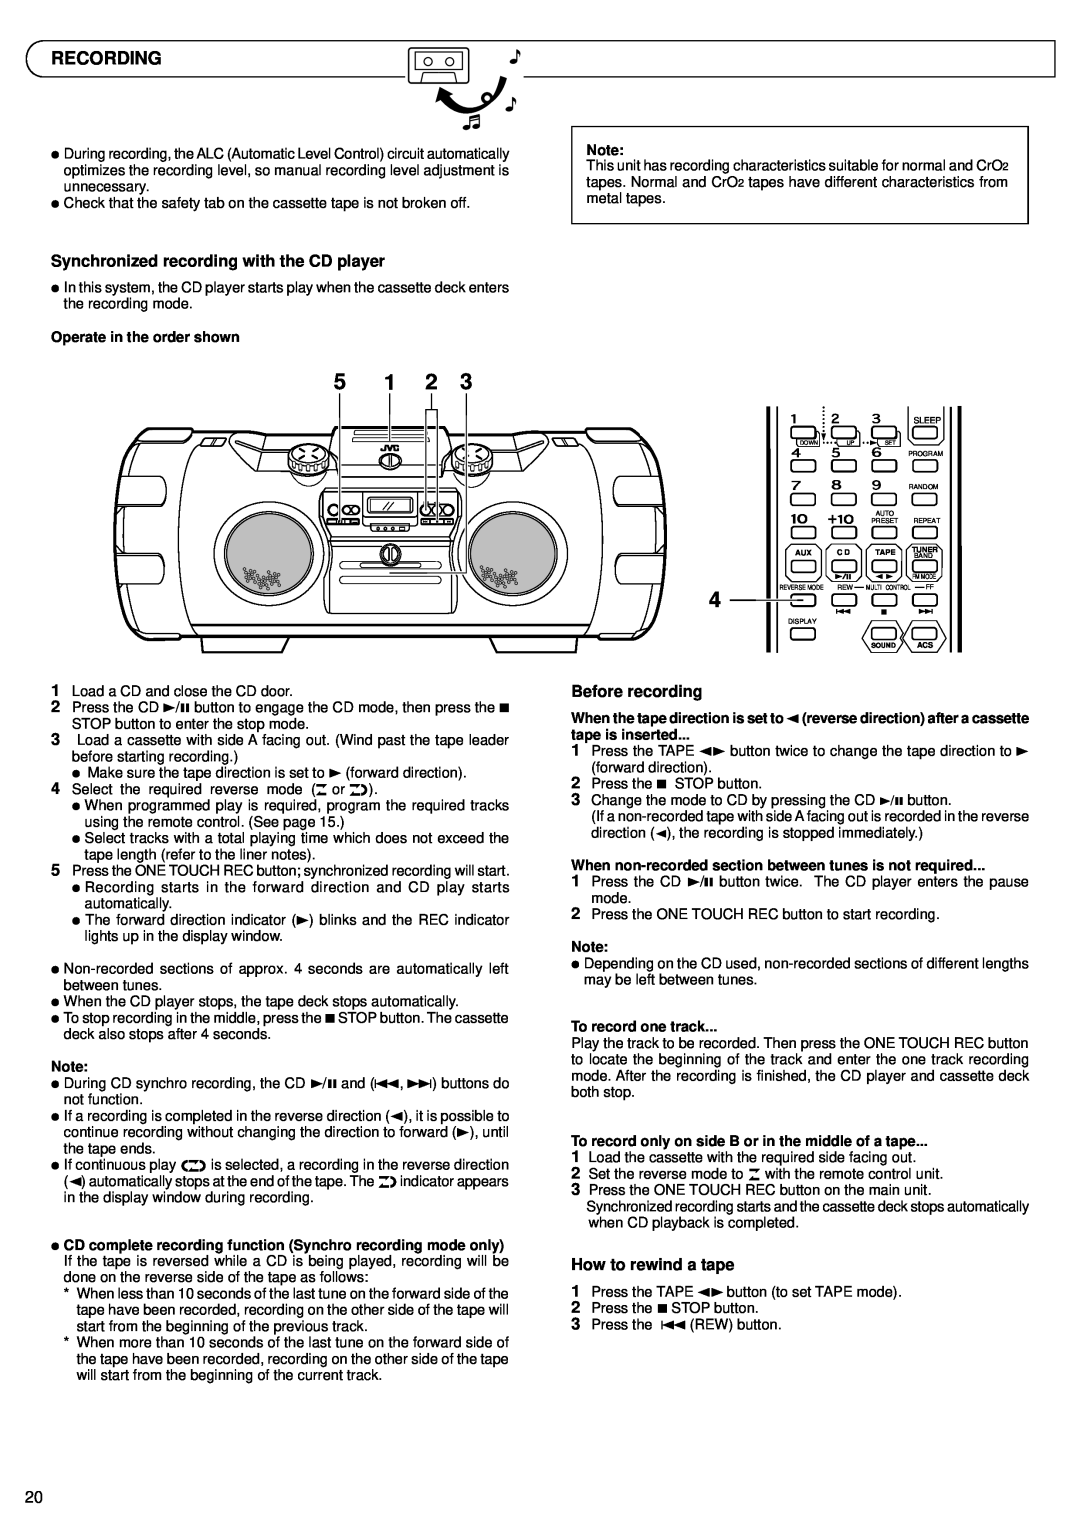 JVC RV-B99 BK/BU manual Recording, Synchronized recording with the CD player, Before recording, How to rewind a tape 